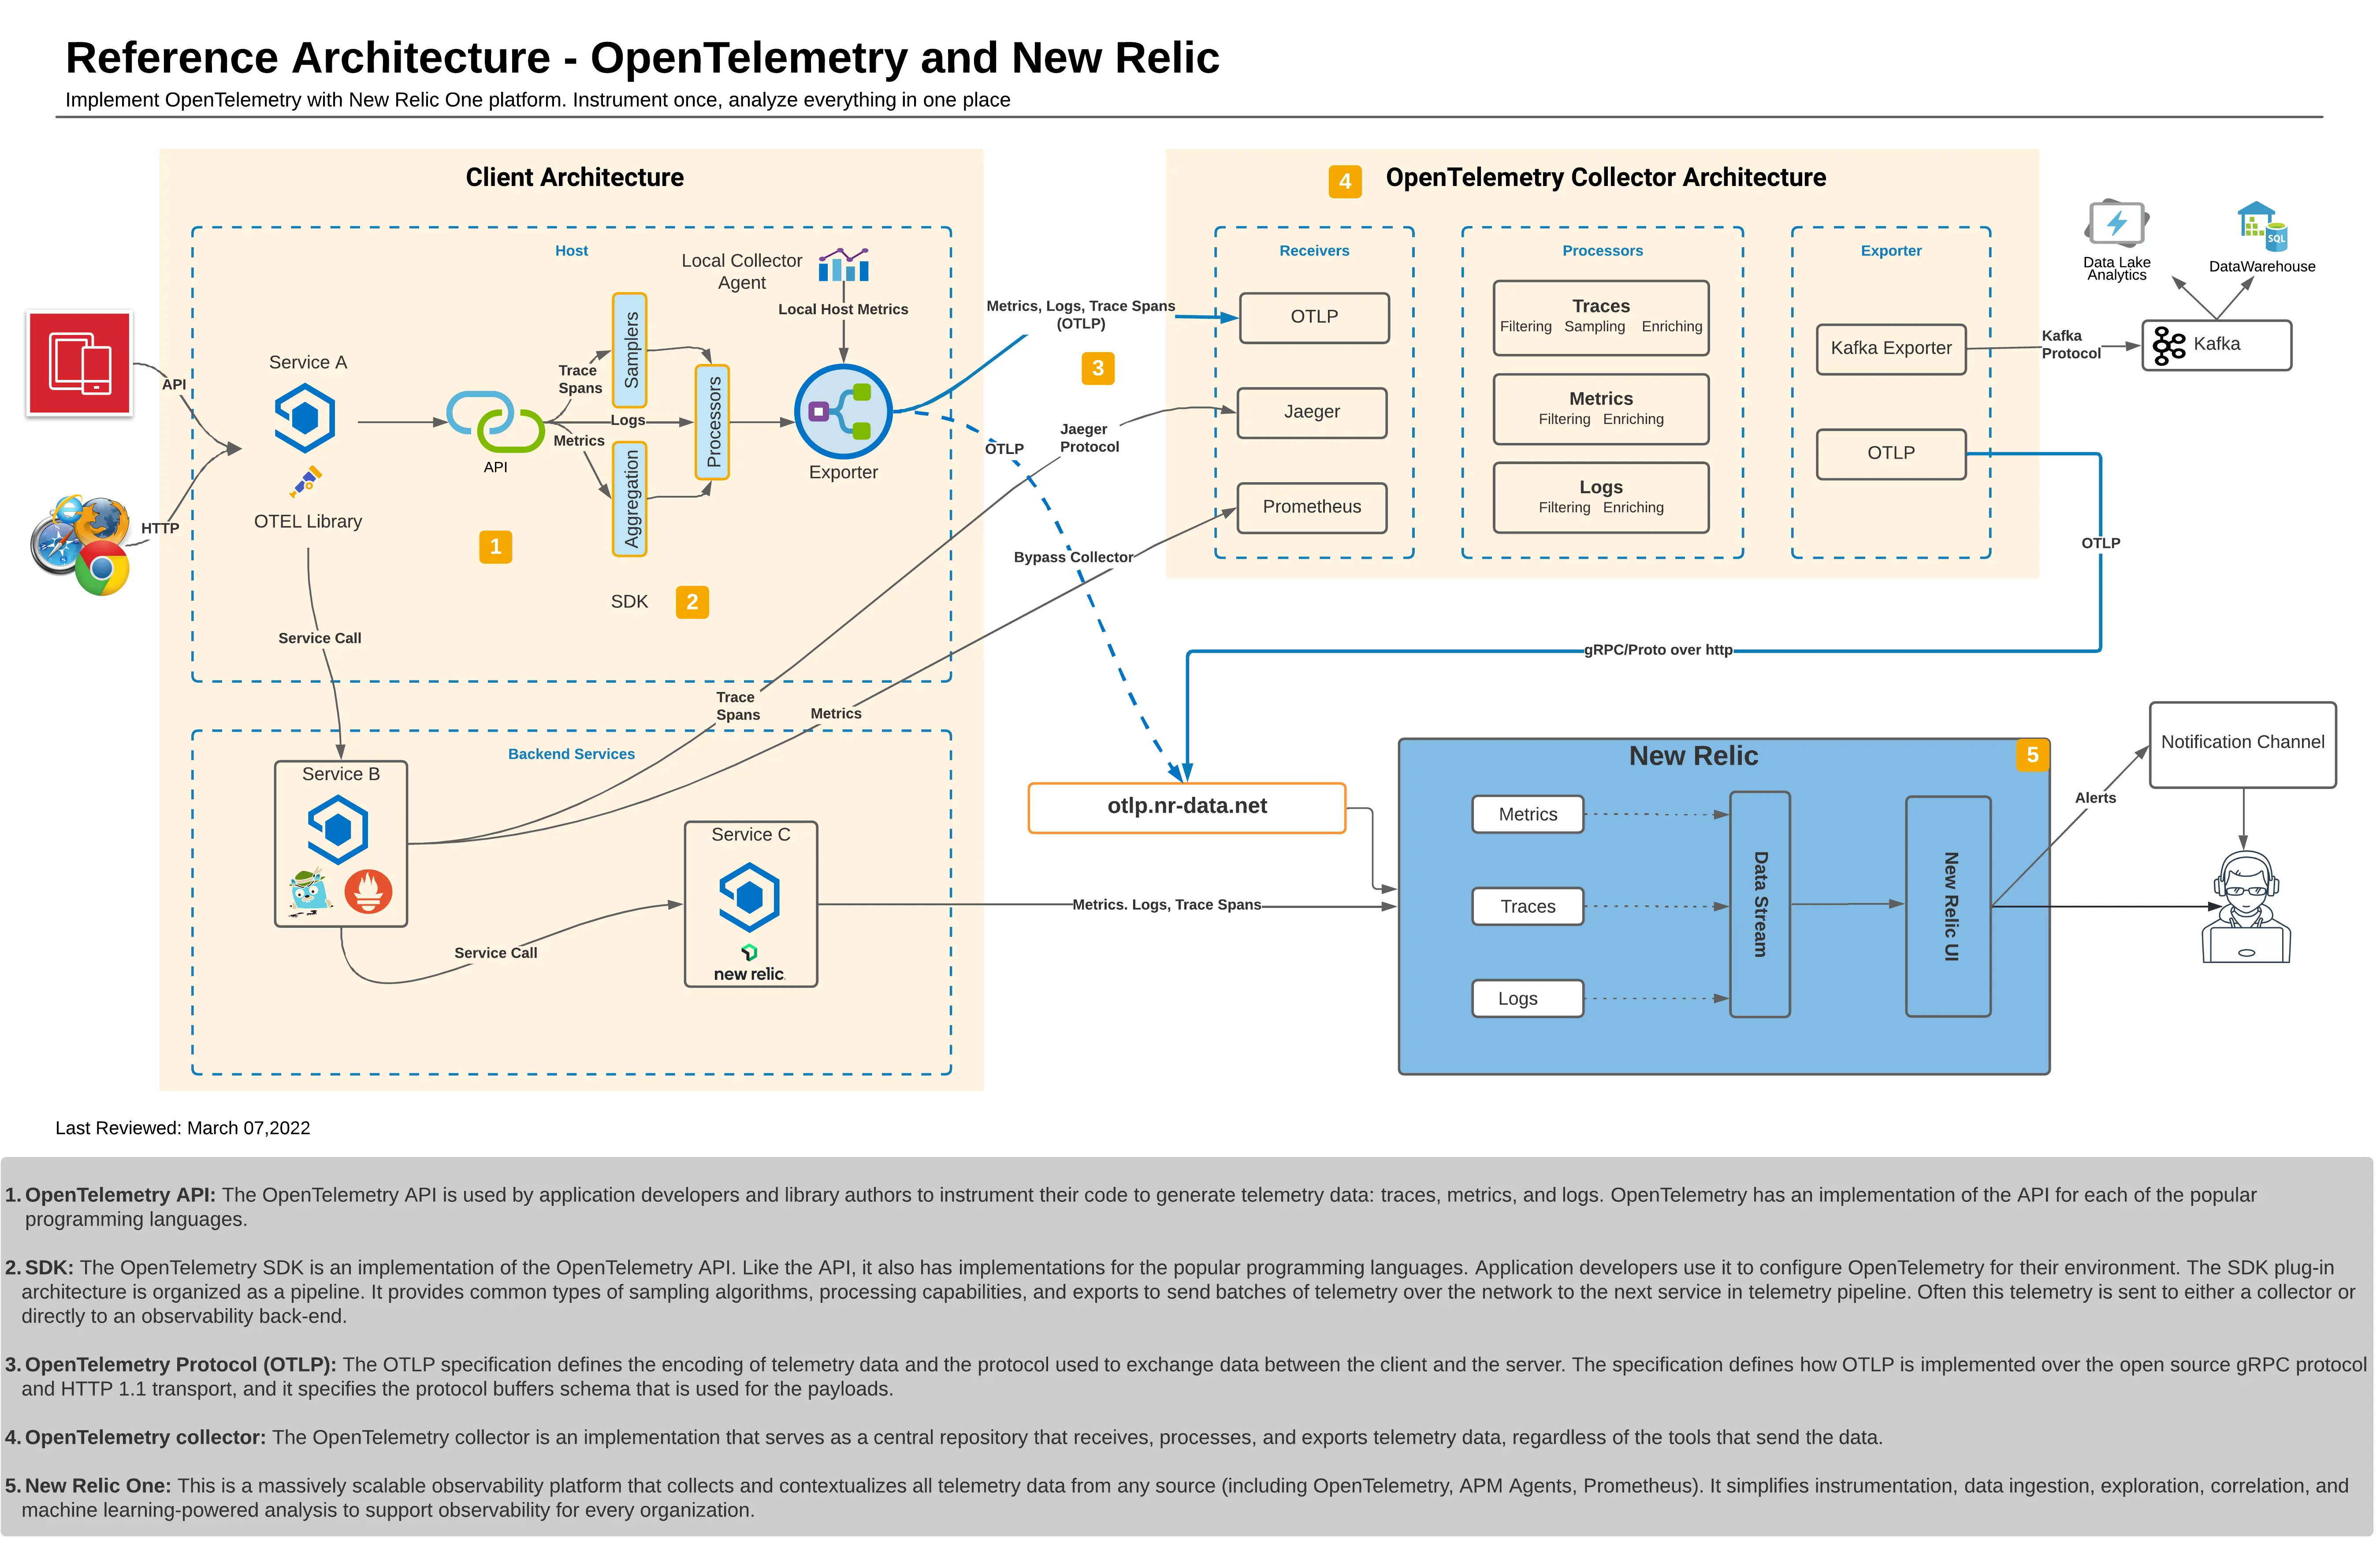 Diagram showing a reference architecture for OpenTelemetry and New Relic